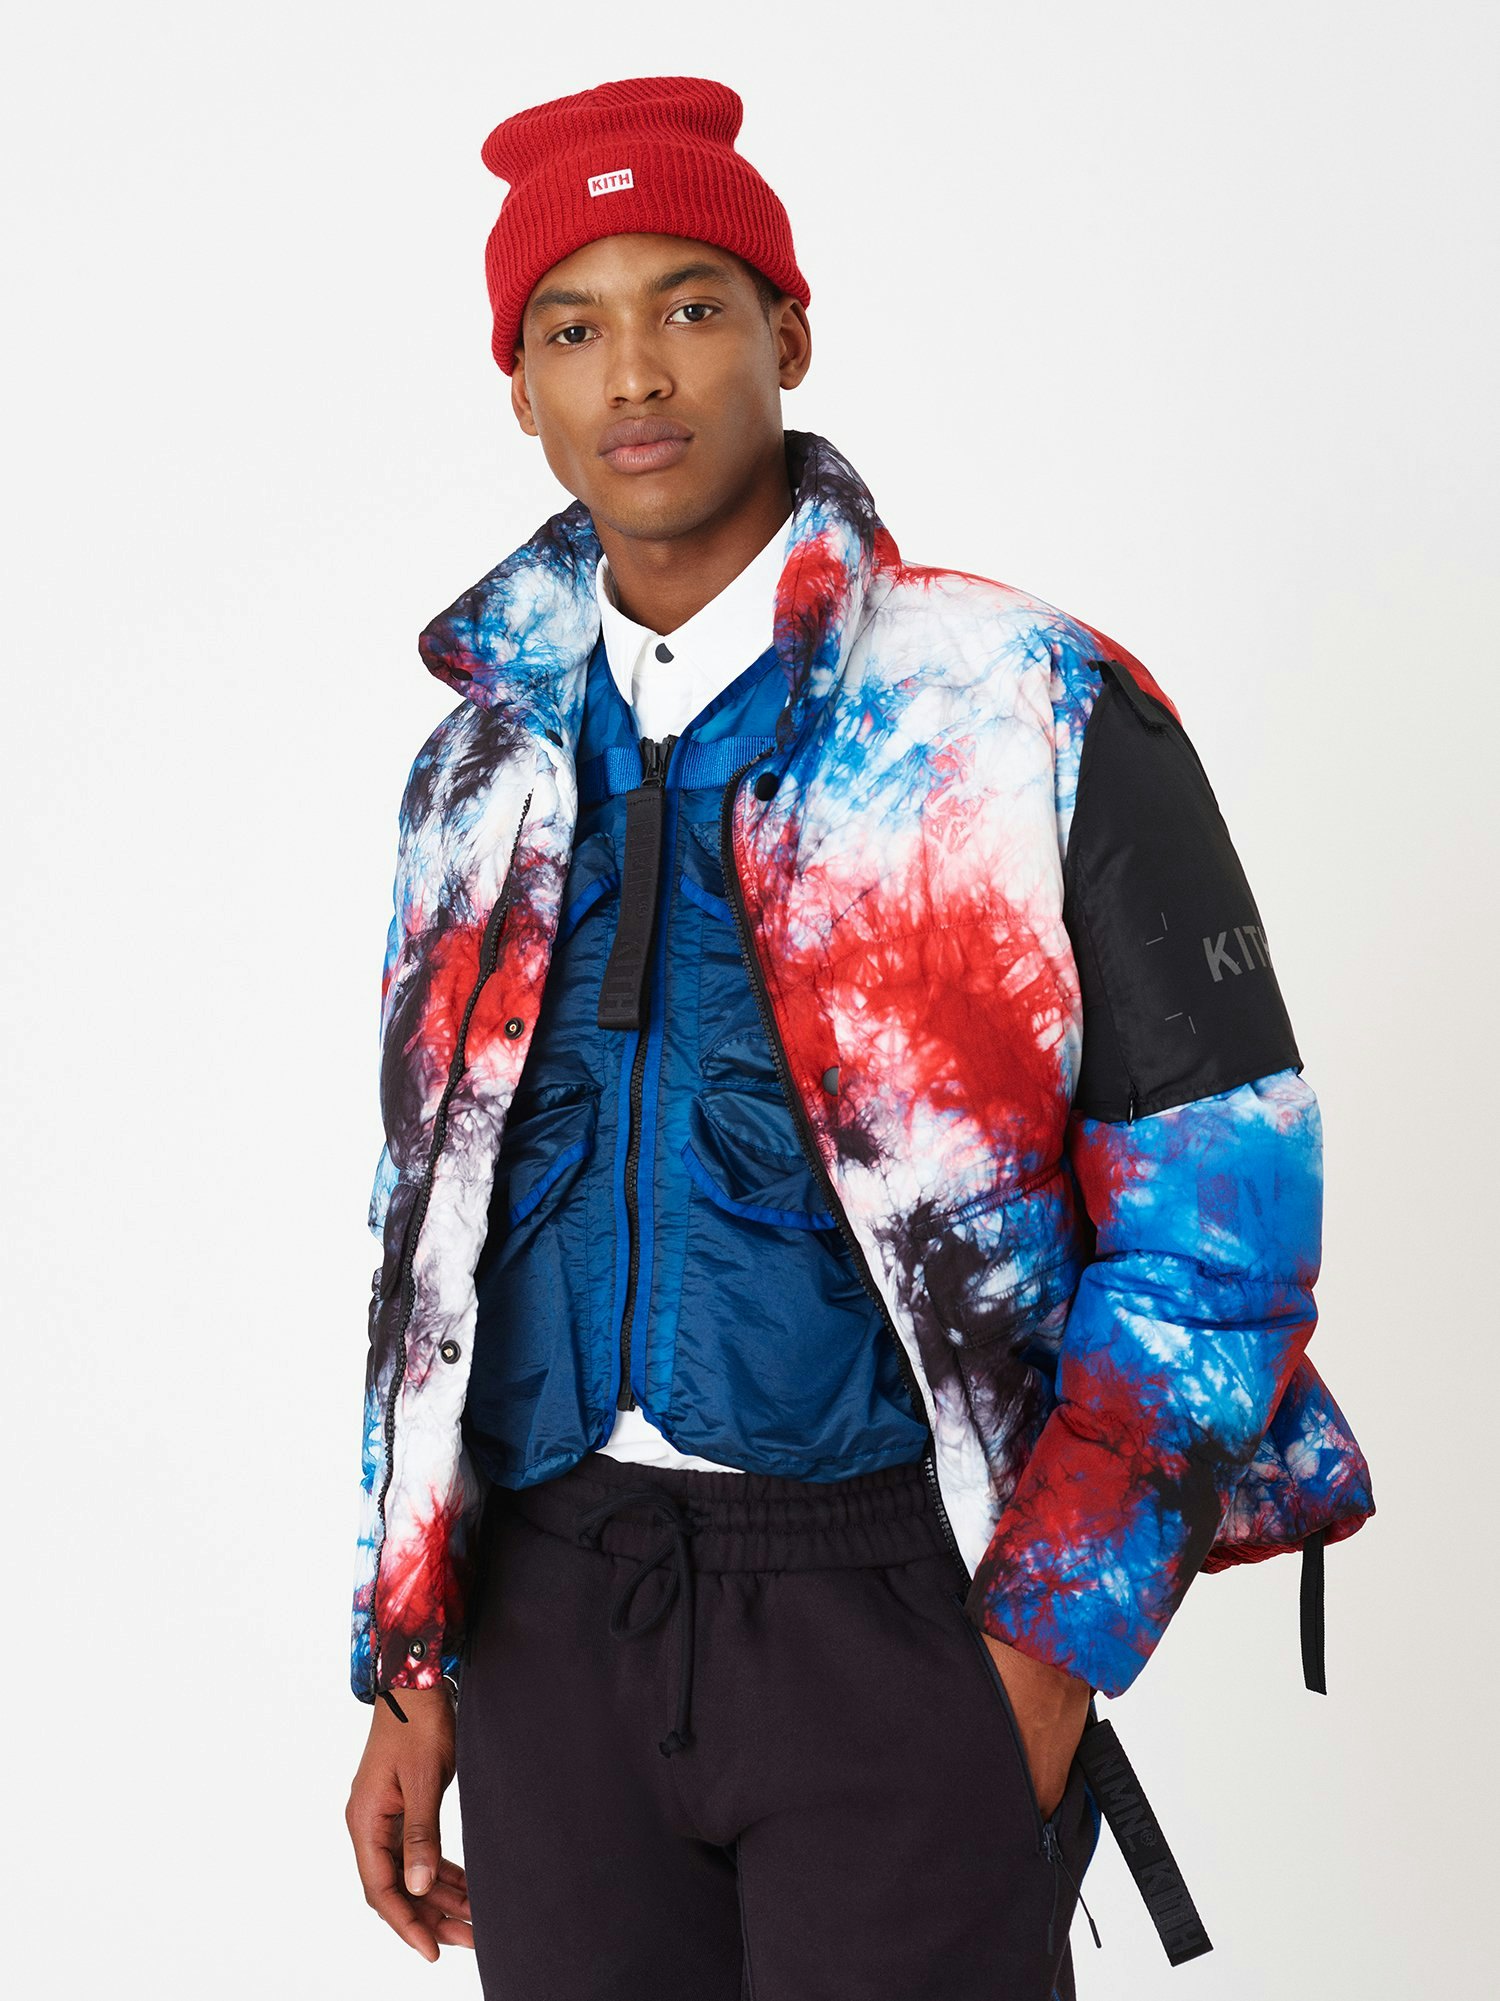 KITH enlists this Italian brand for a high tech tie-dye capsule